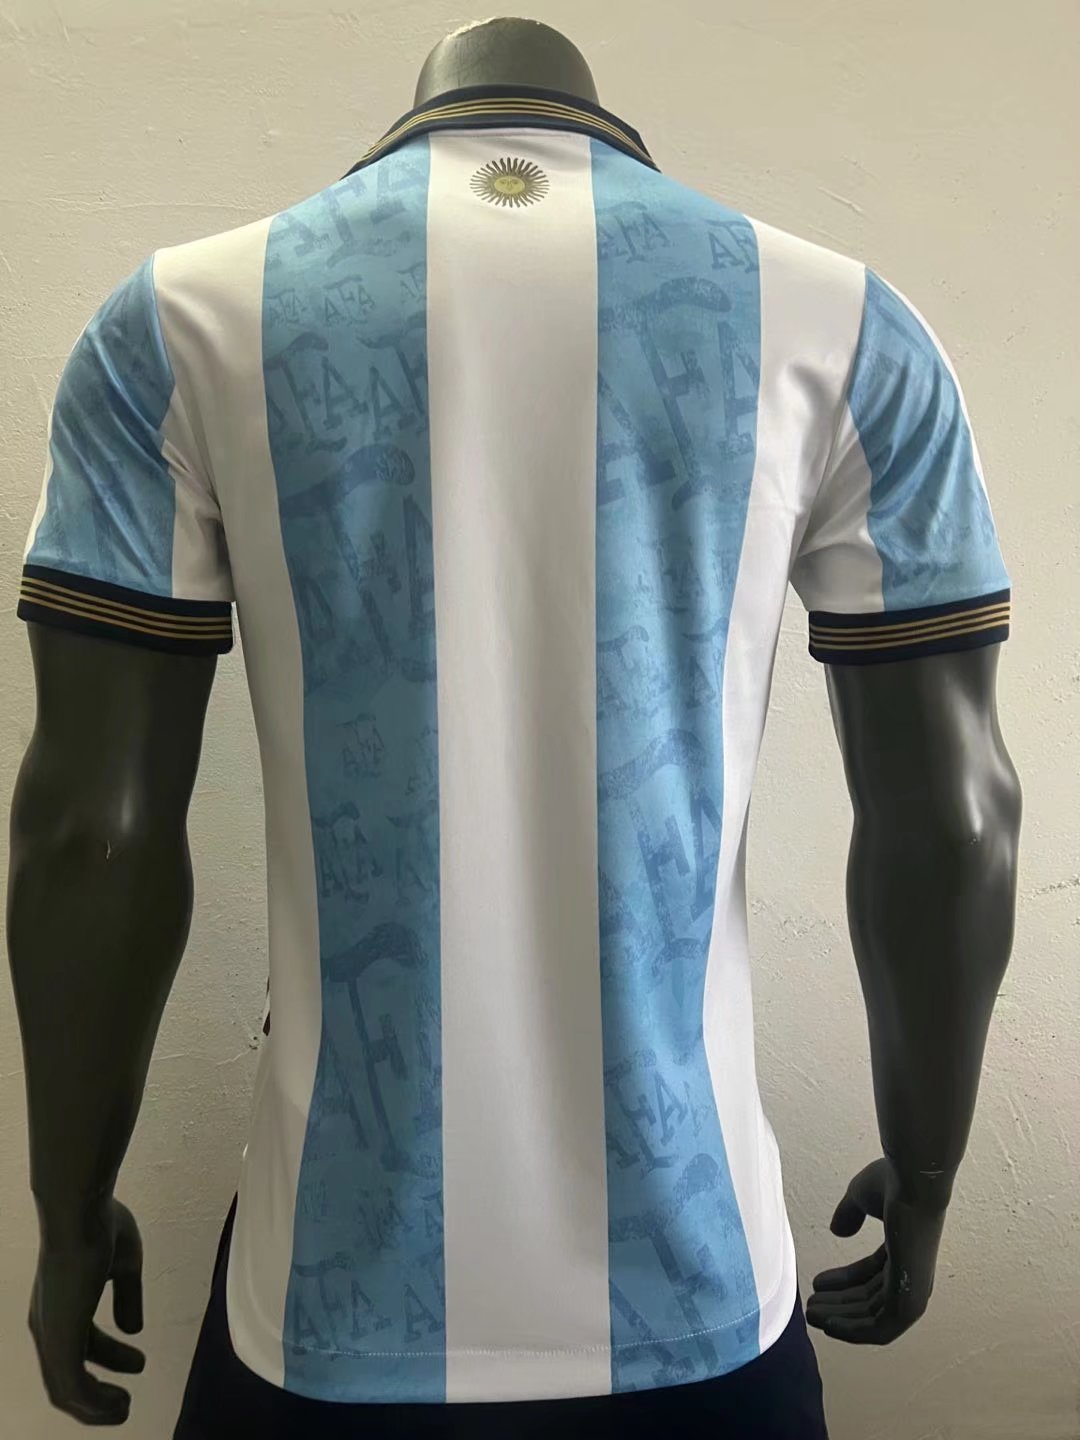 Men's Argentina Special Edition Jersey 22/23 #Match